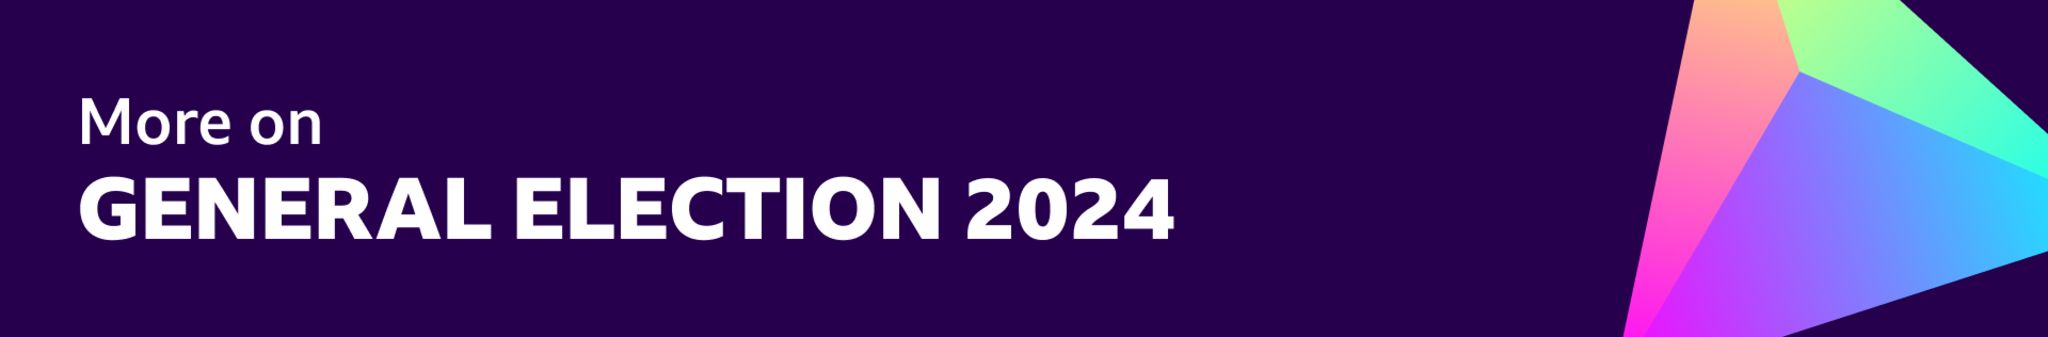 Purple banner that says 'More on General Election 2024'